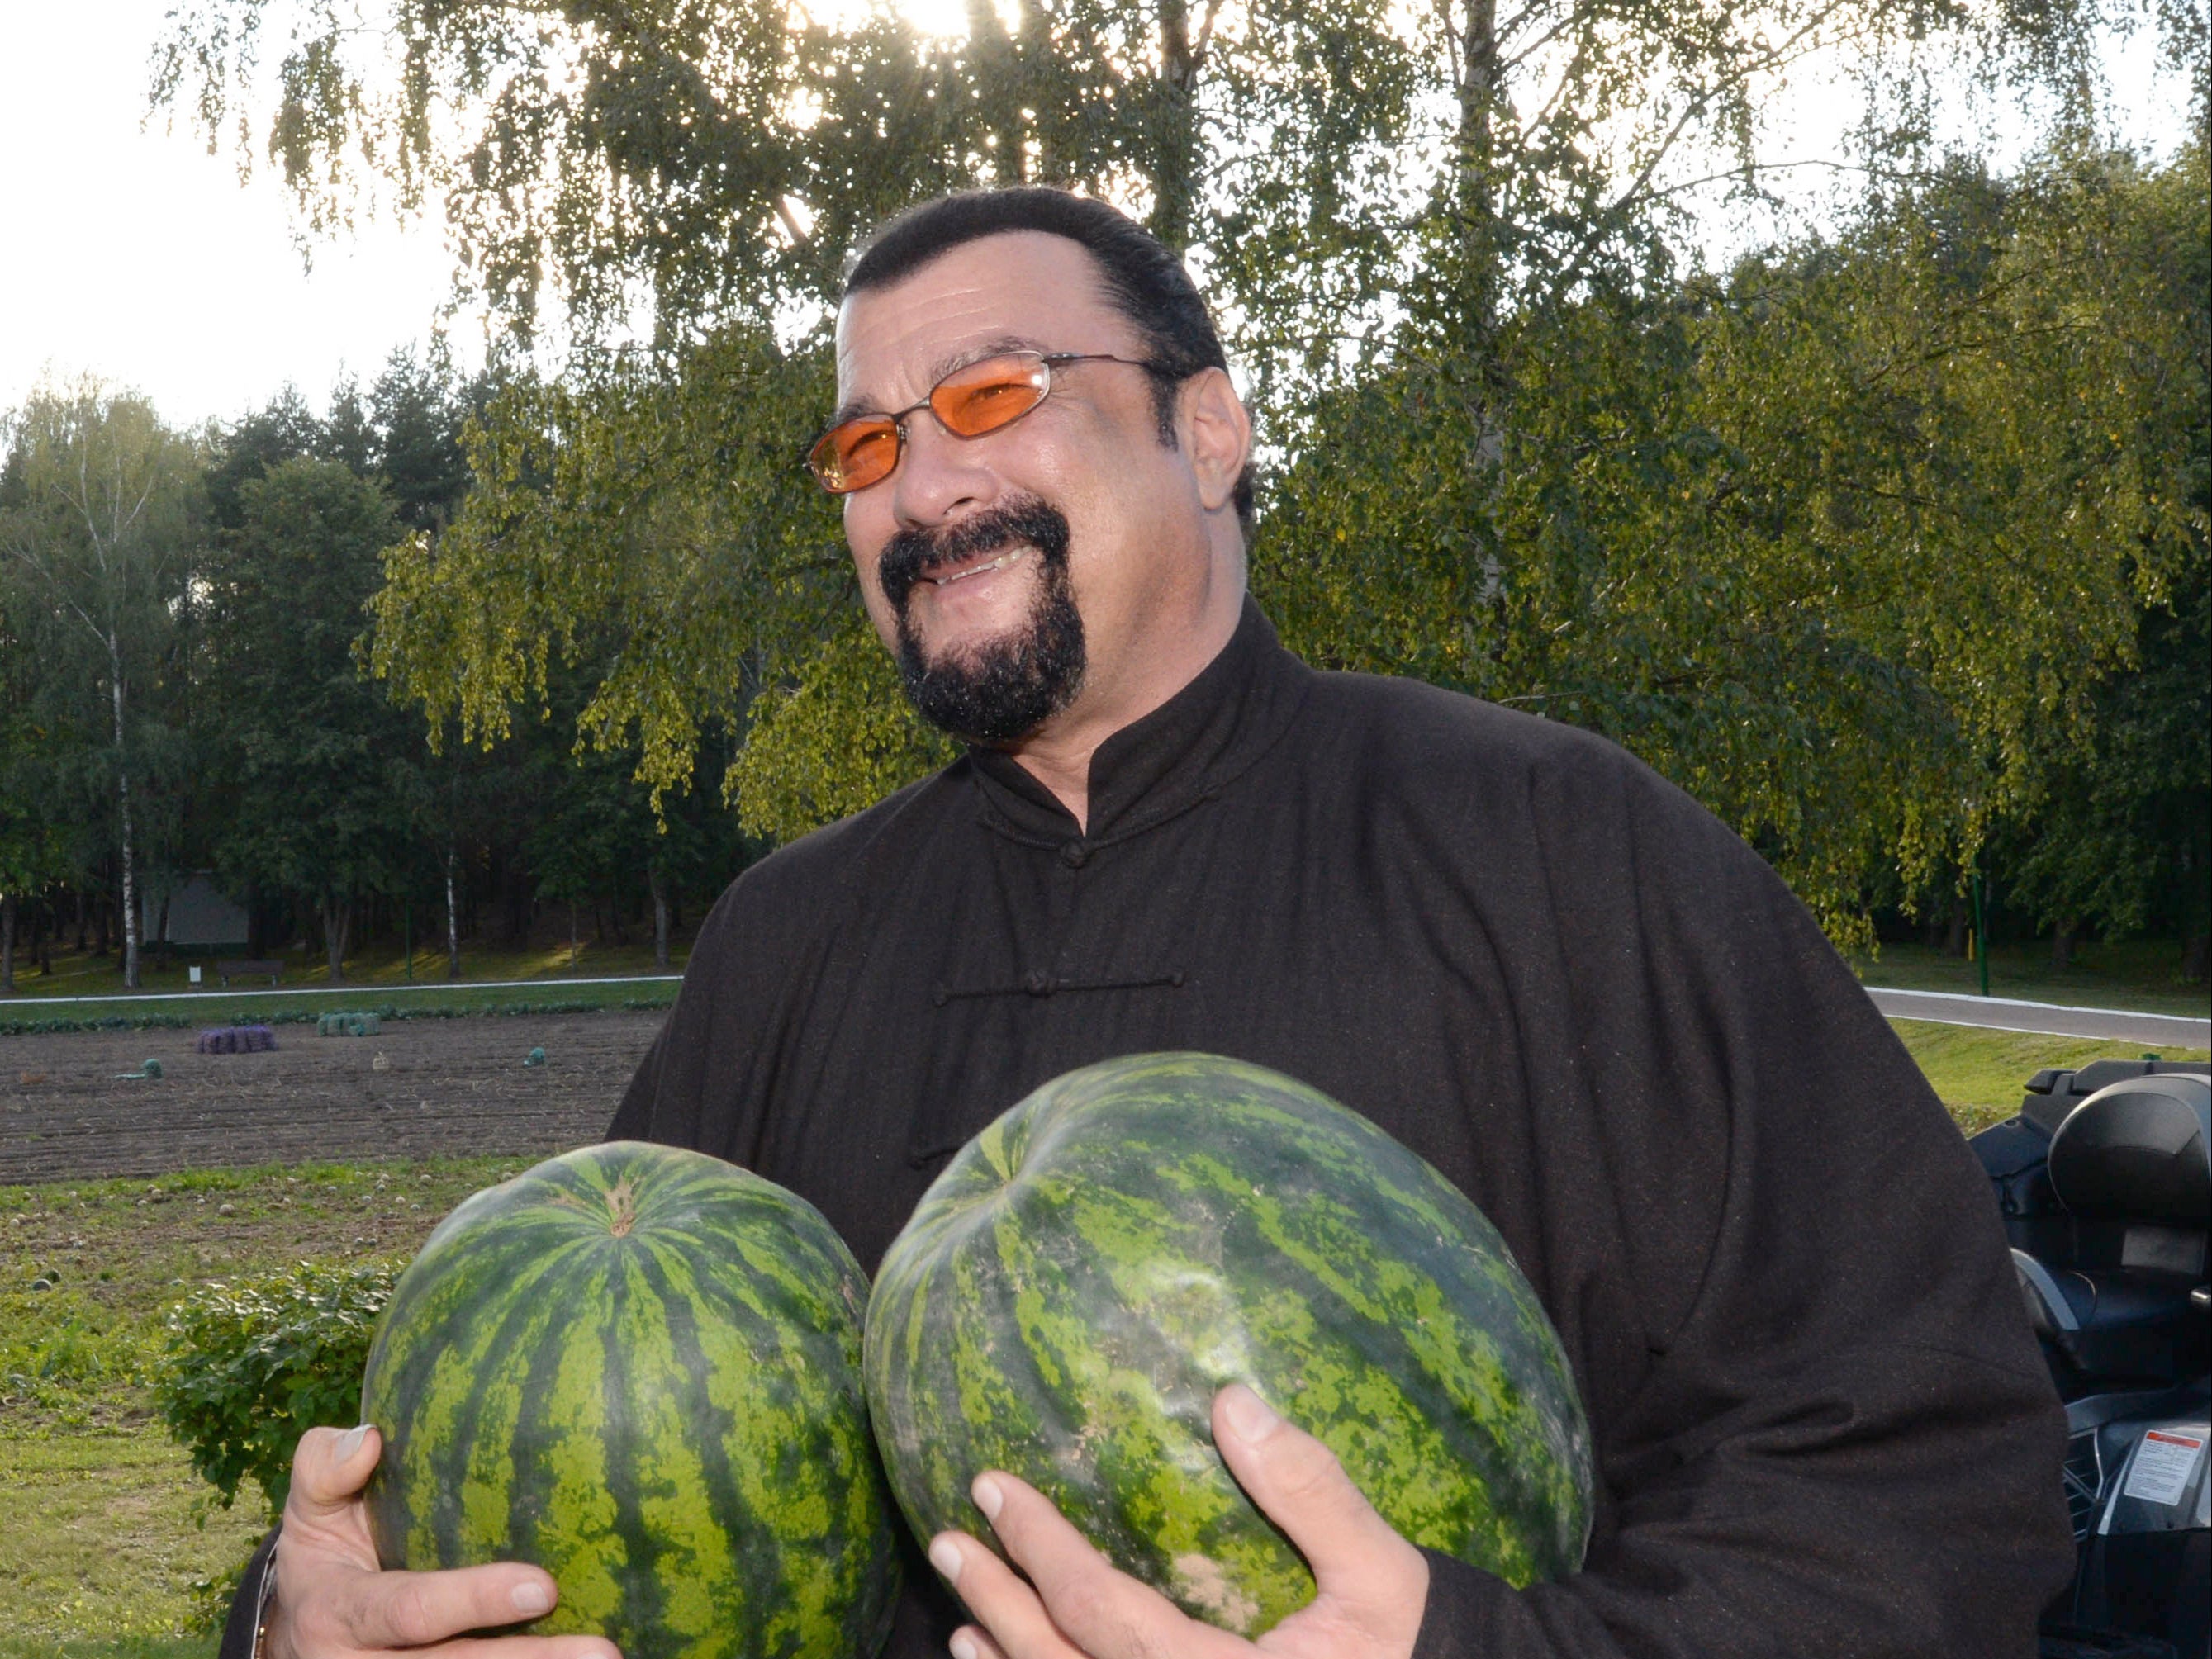 The glimmer man: Steven Seagal poses with two watermelons in 2016, the year he was granted both Serbian and Russian citizenship